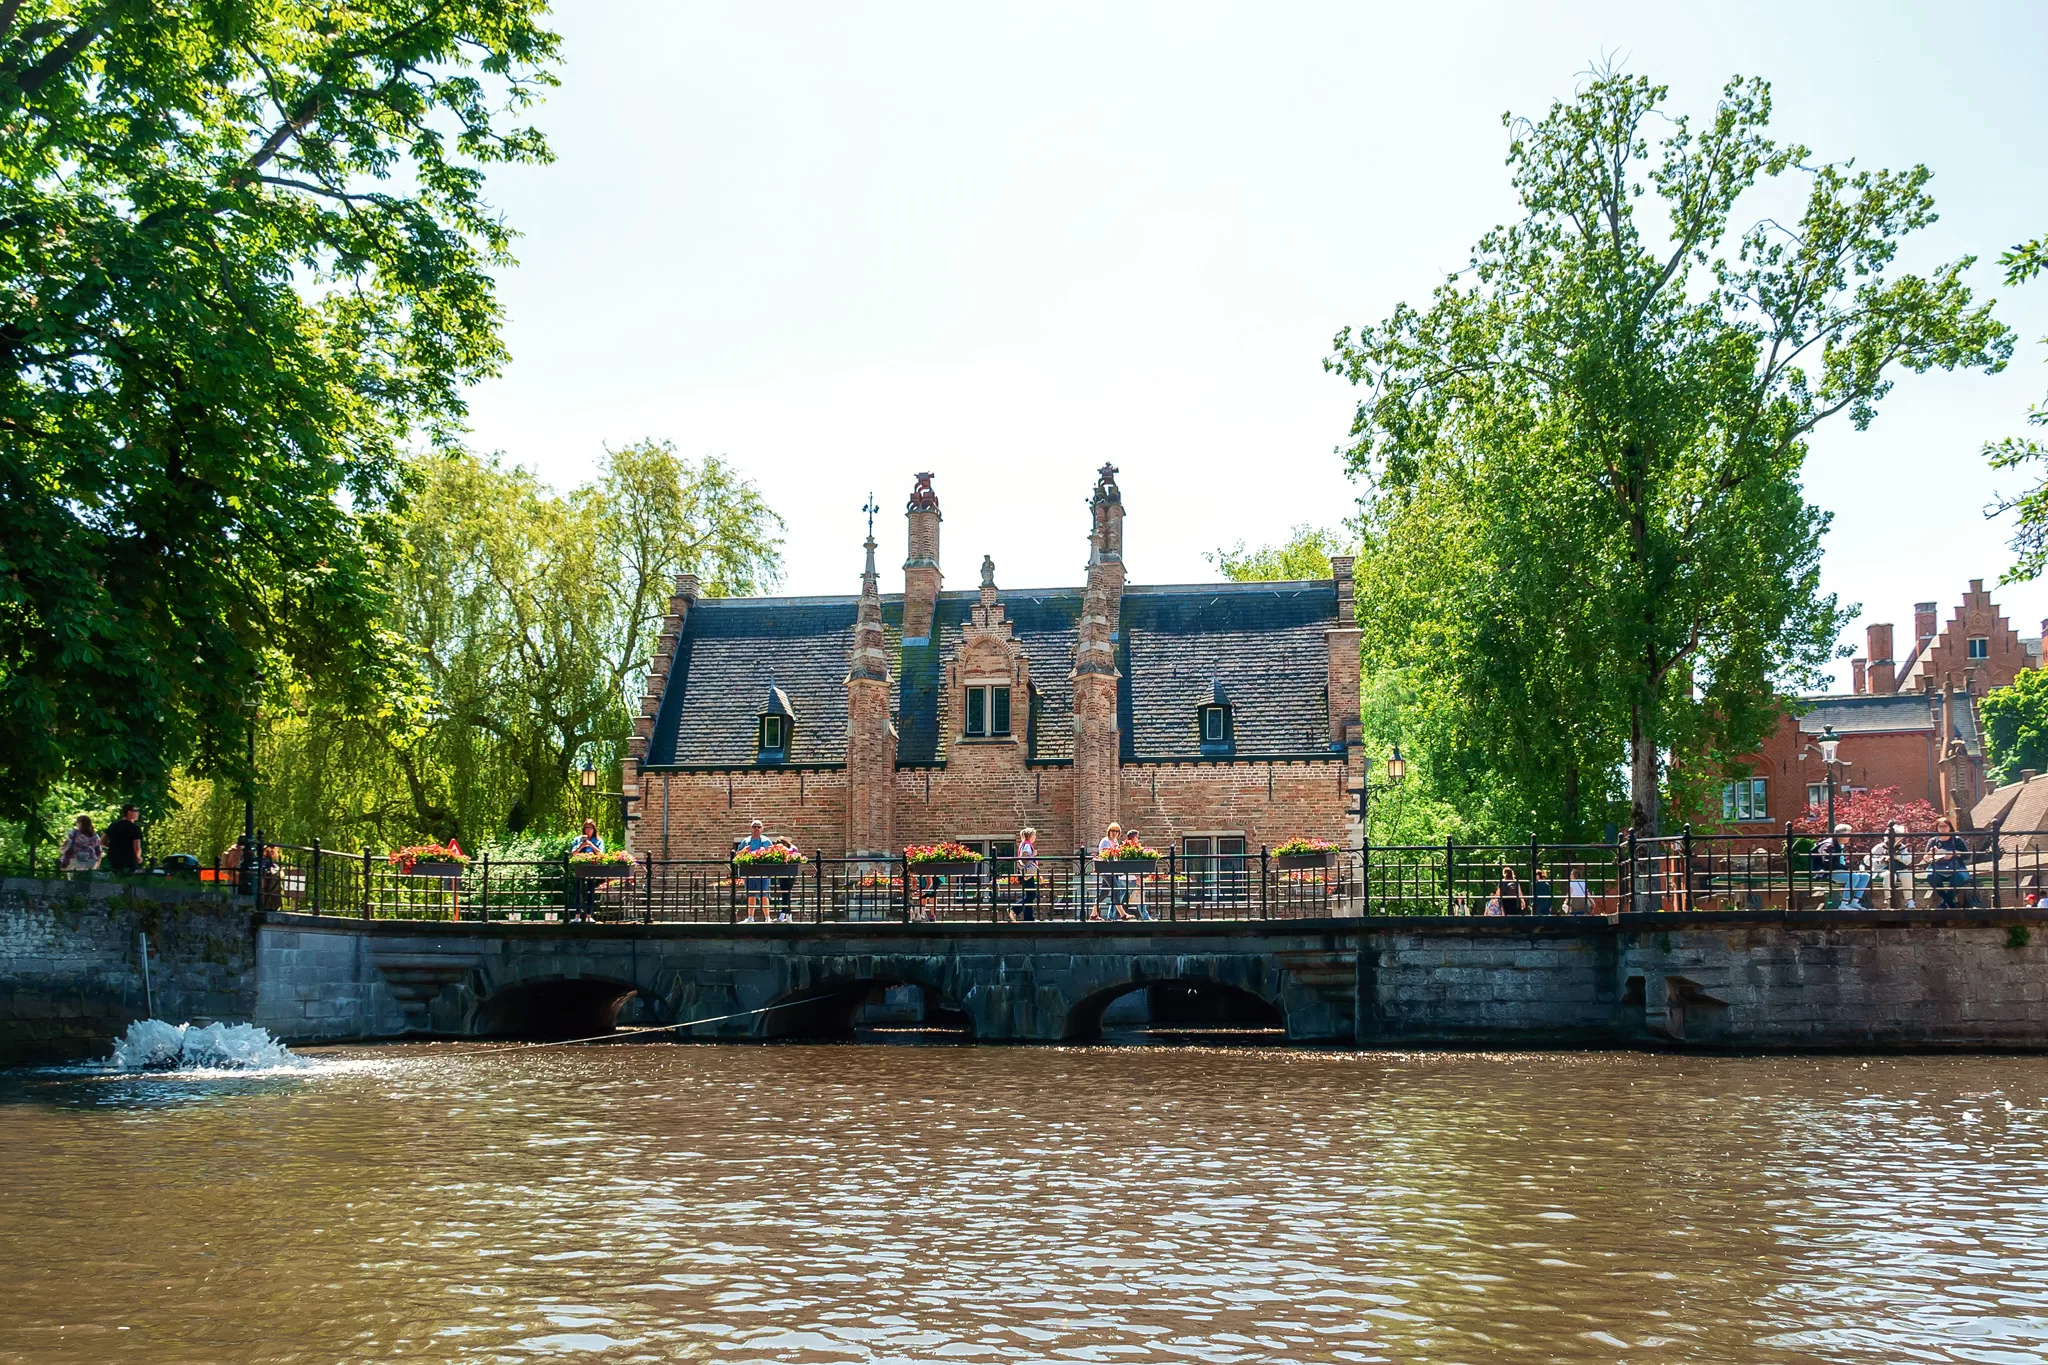 A canal tour, as shown in this tour, is a unique thing to do in Bruges